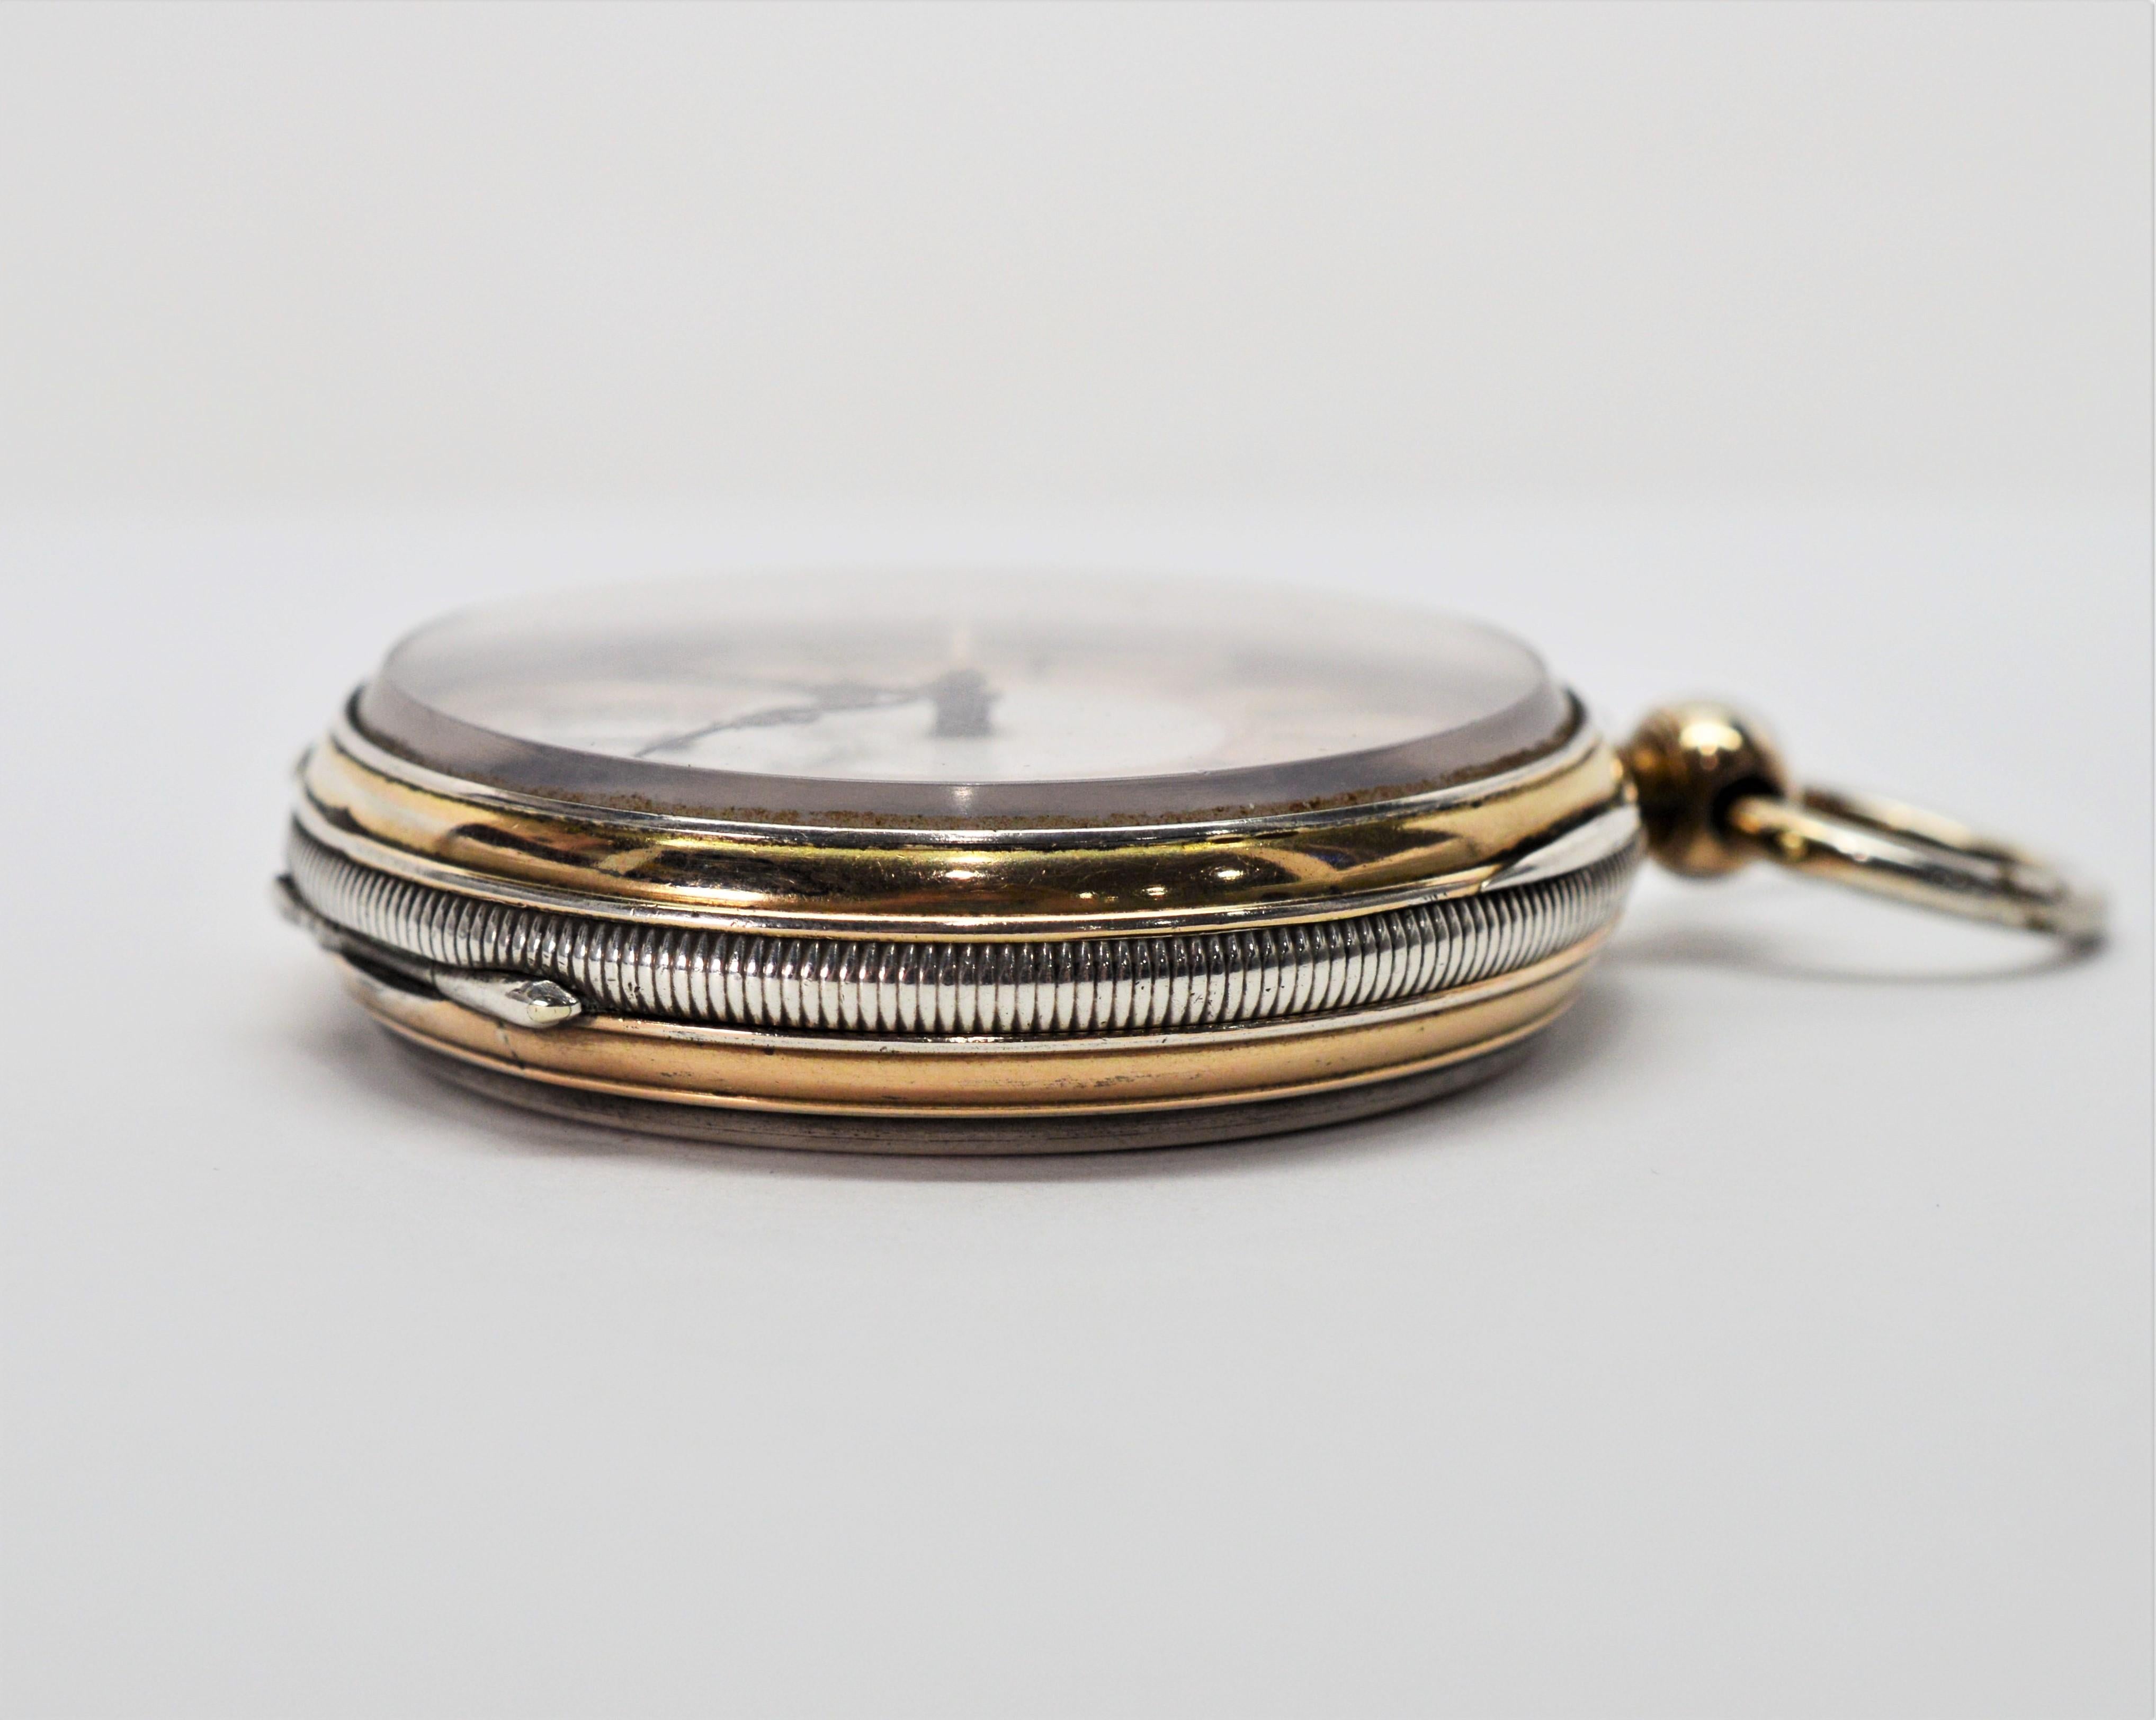 Ancre DePrecision Key Wind Sterling Silver Antique Pocket Watch 2